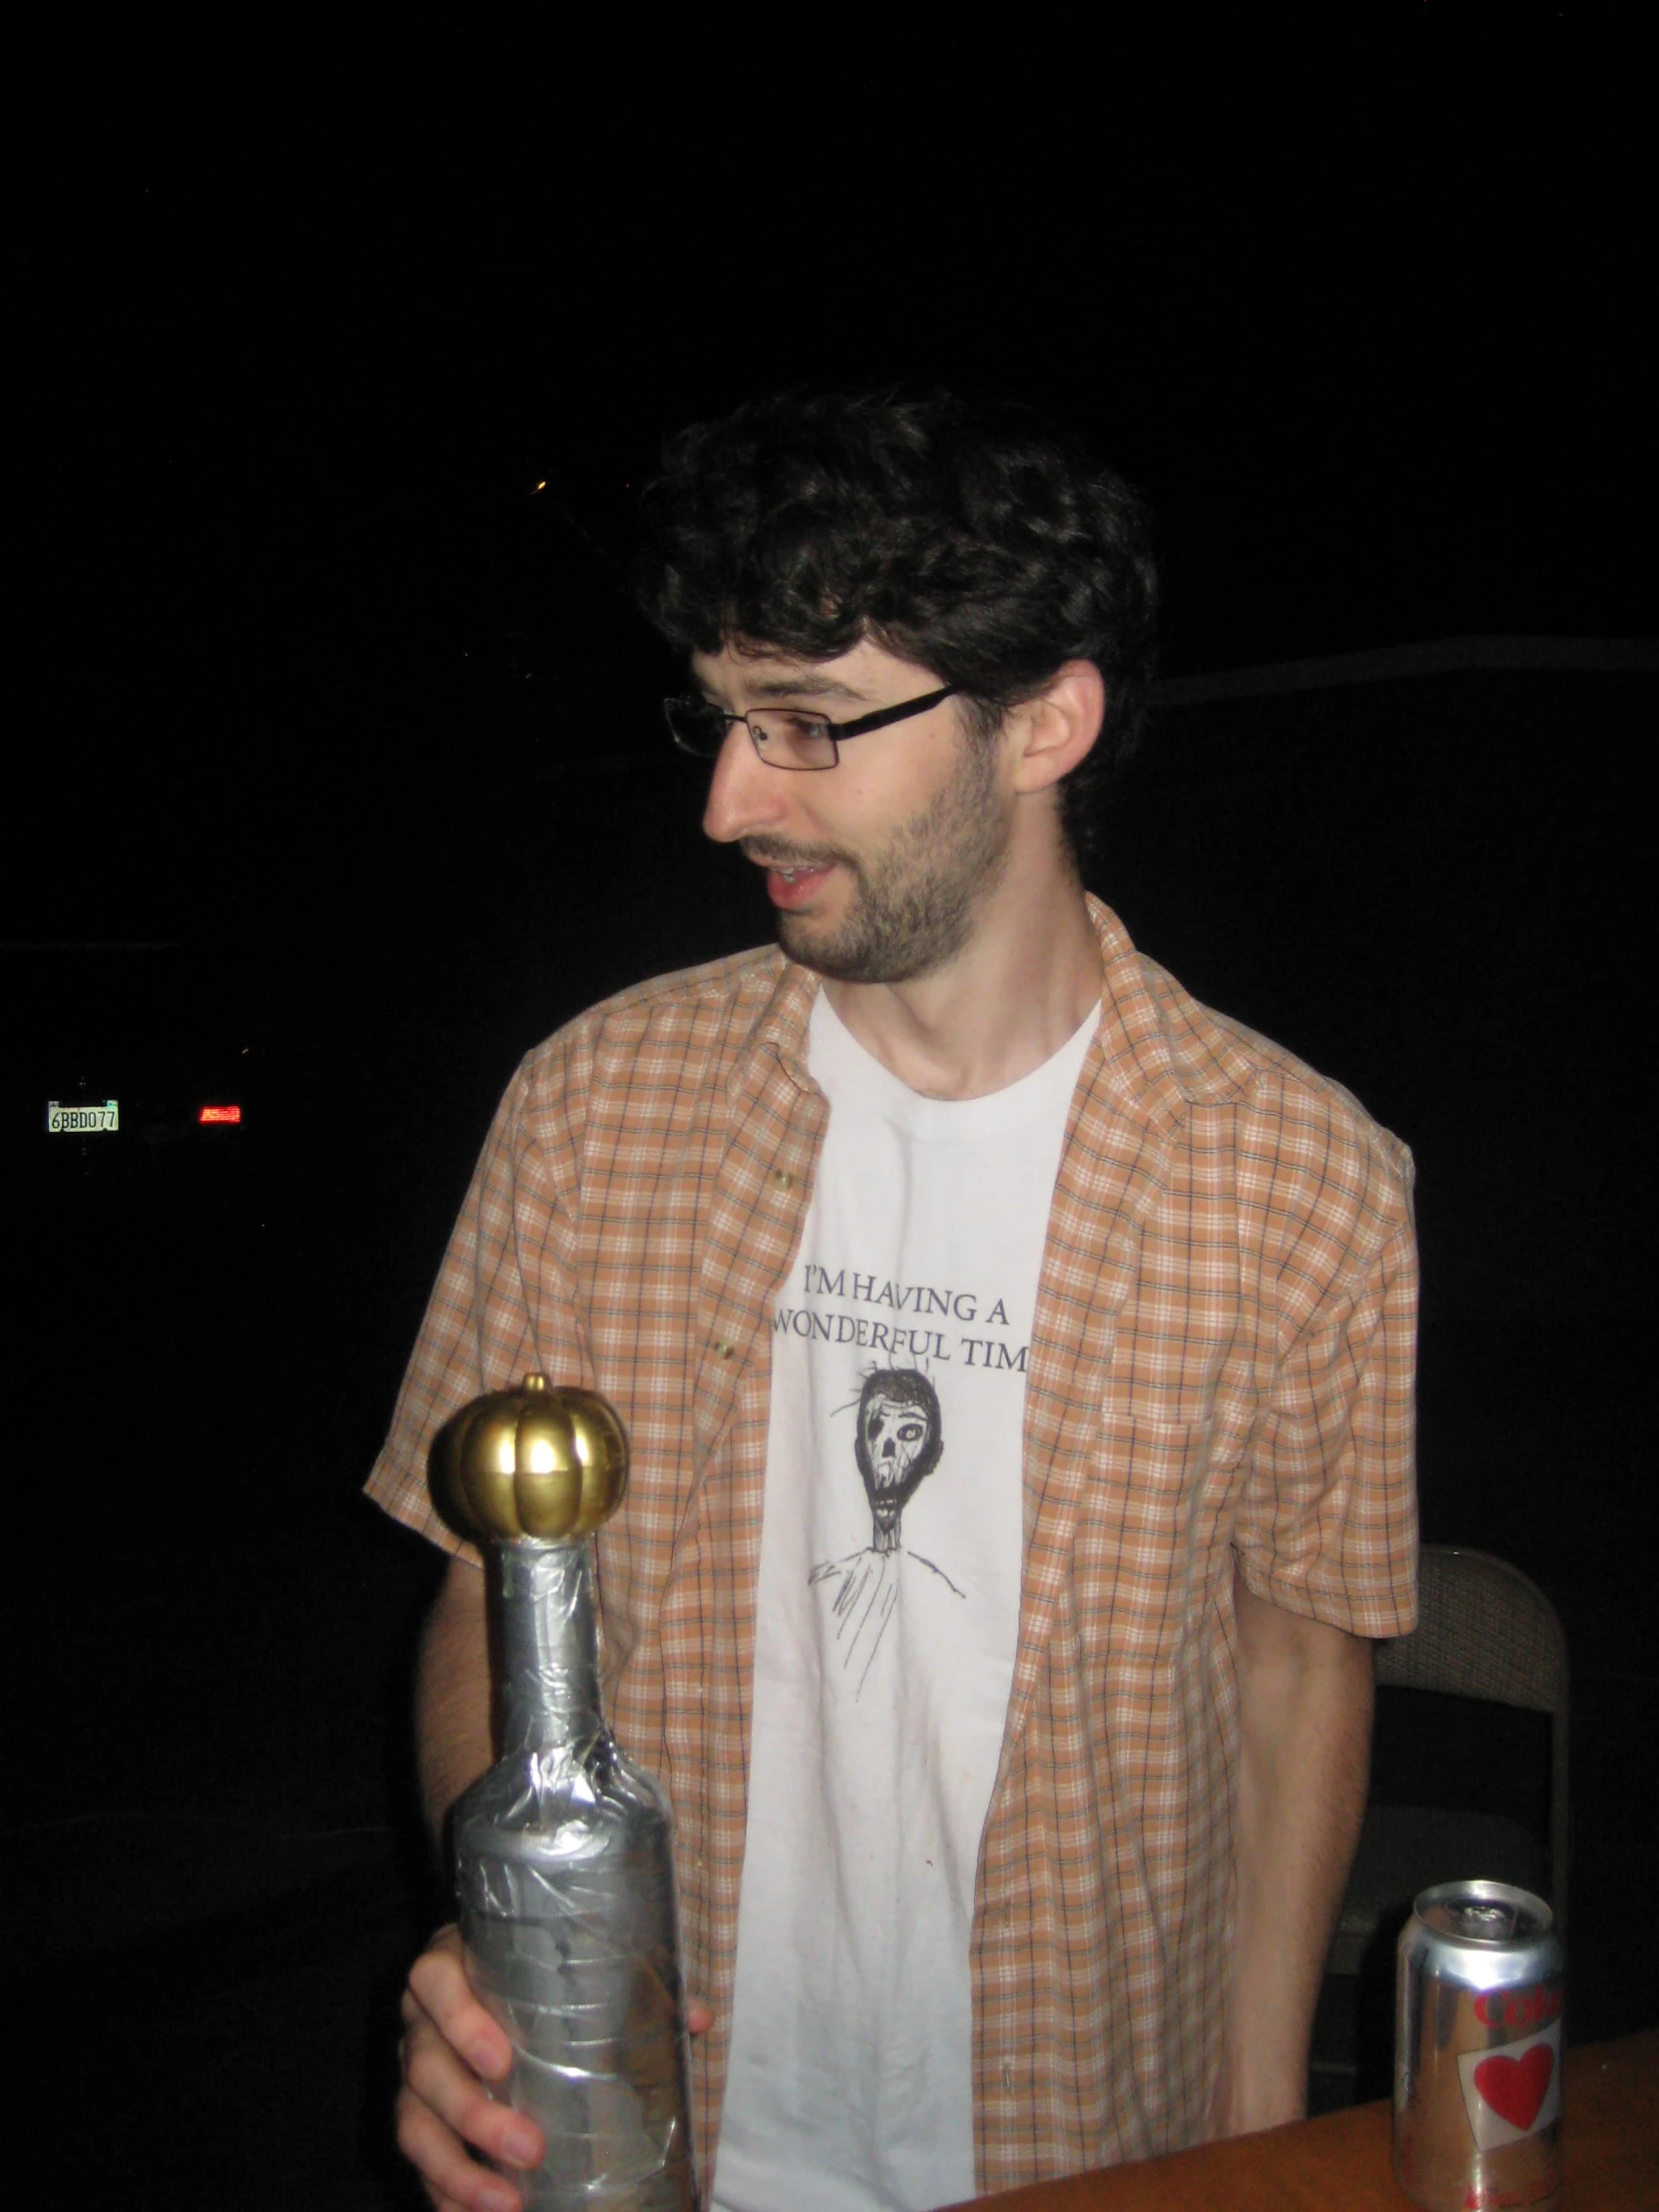 a man with glasses holding a beer bottle